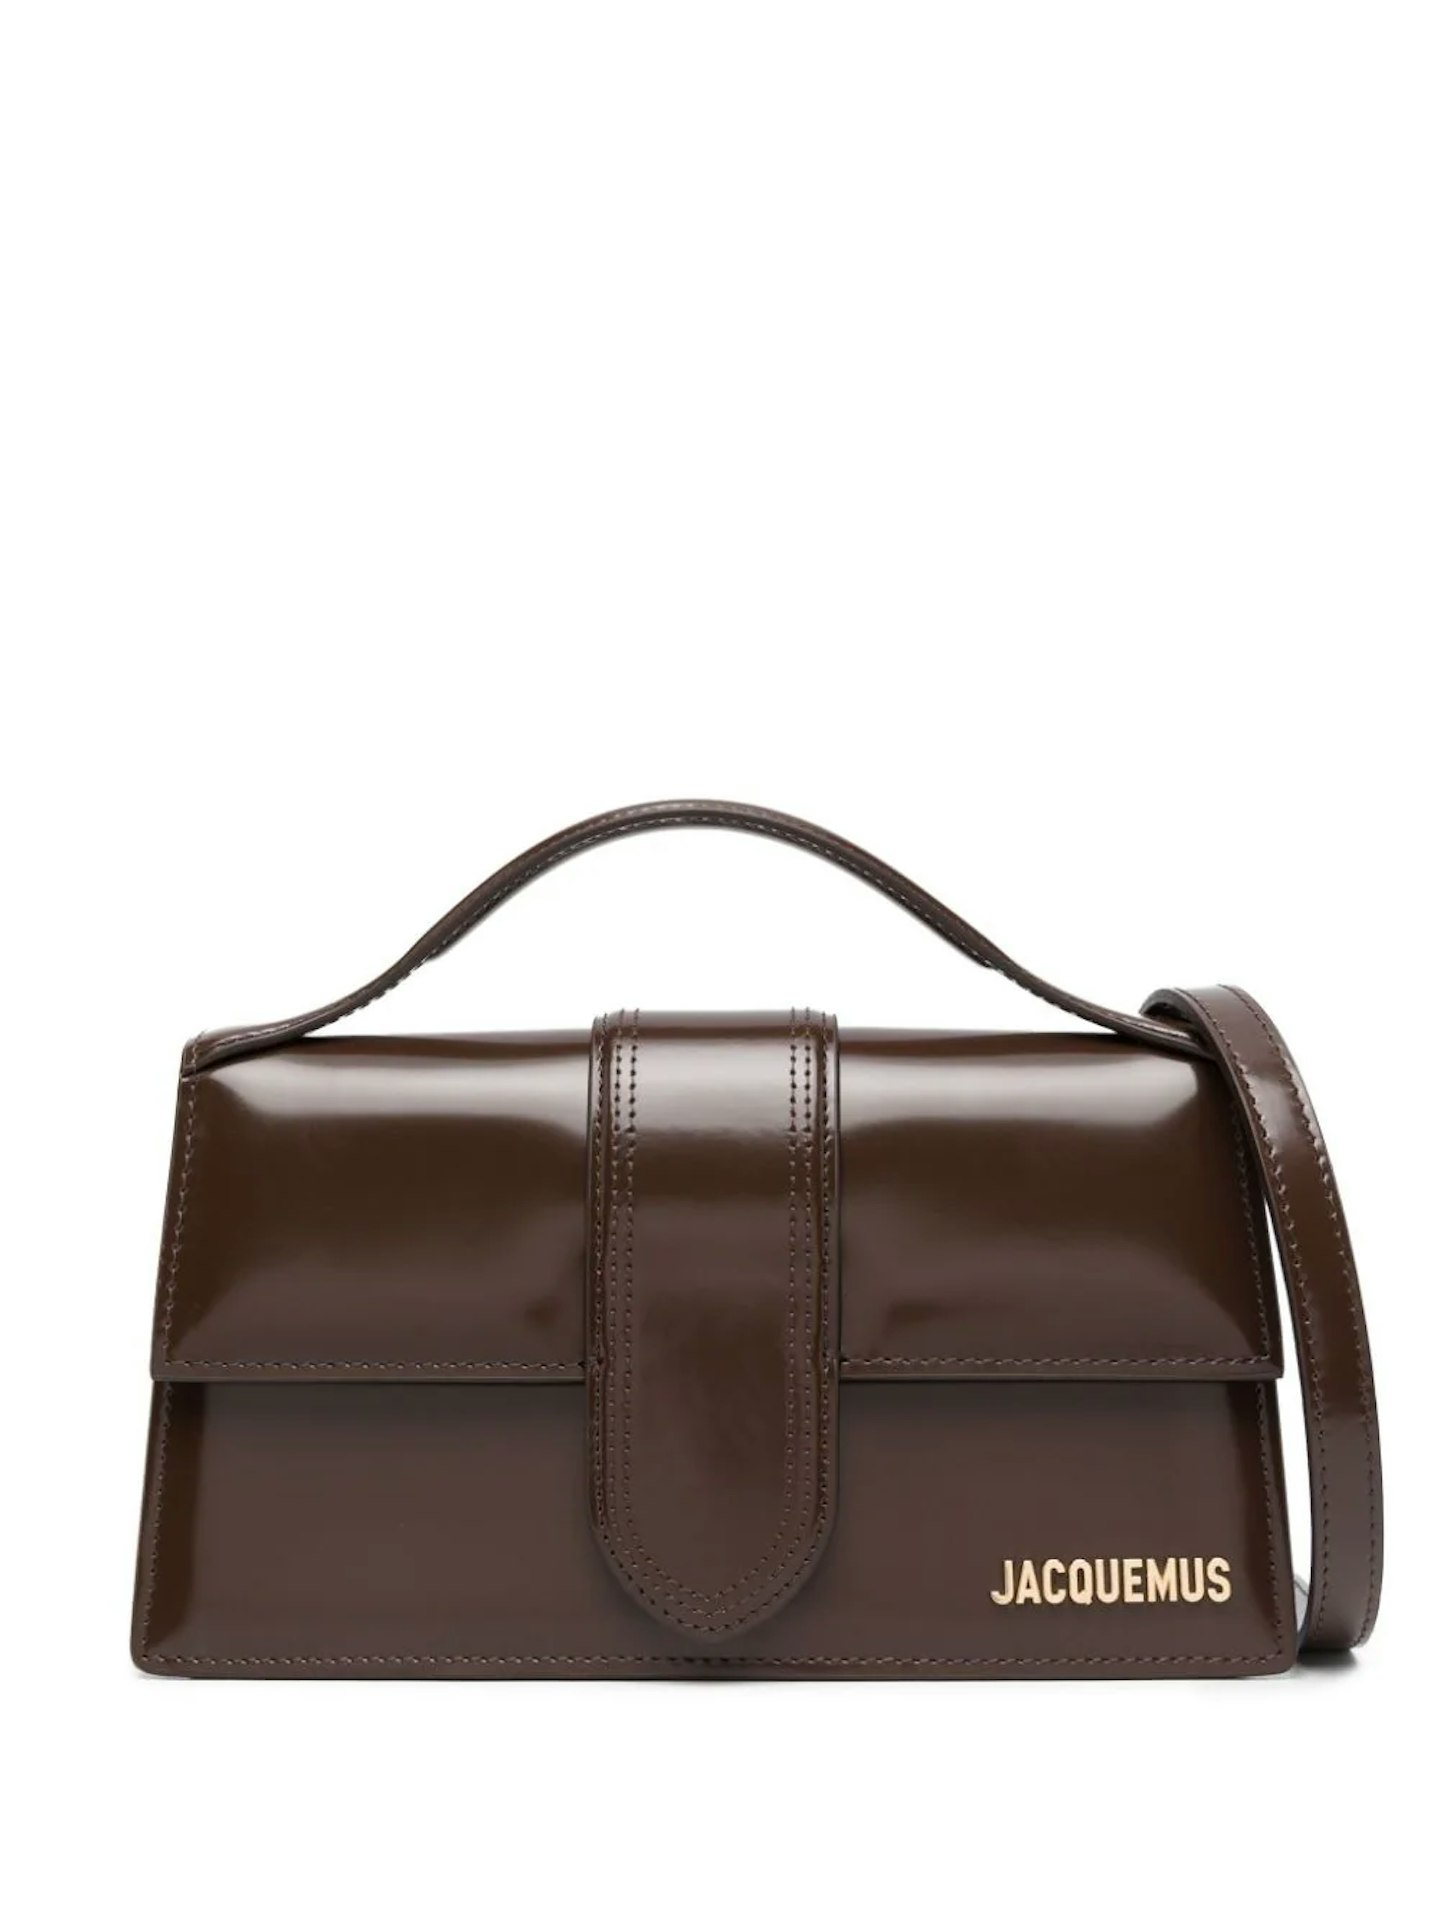 Jacquemus Bambino Leather Tote Bag in Chocolate Brown